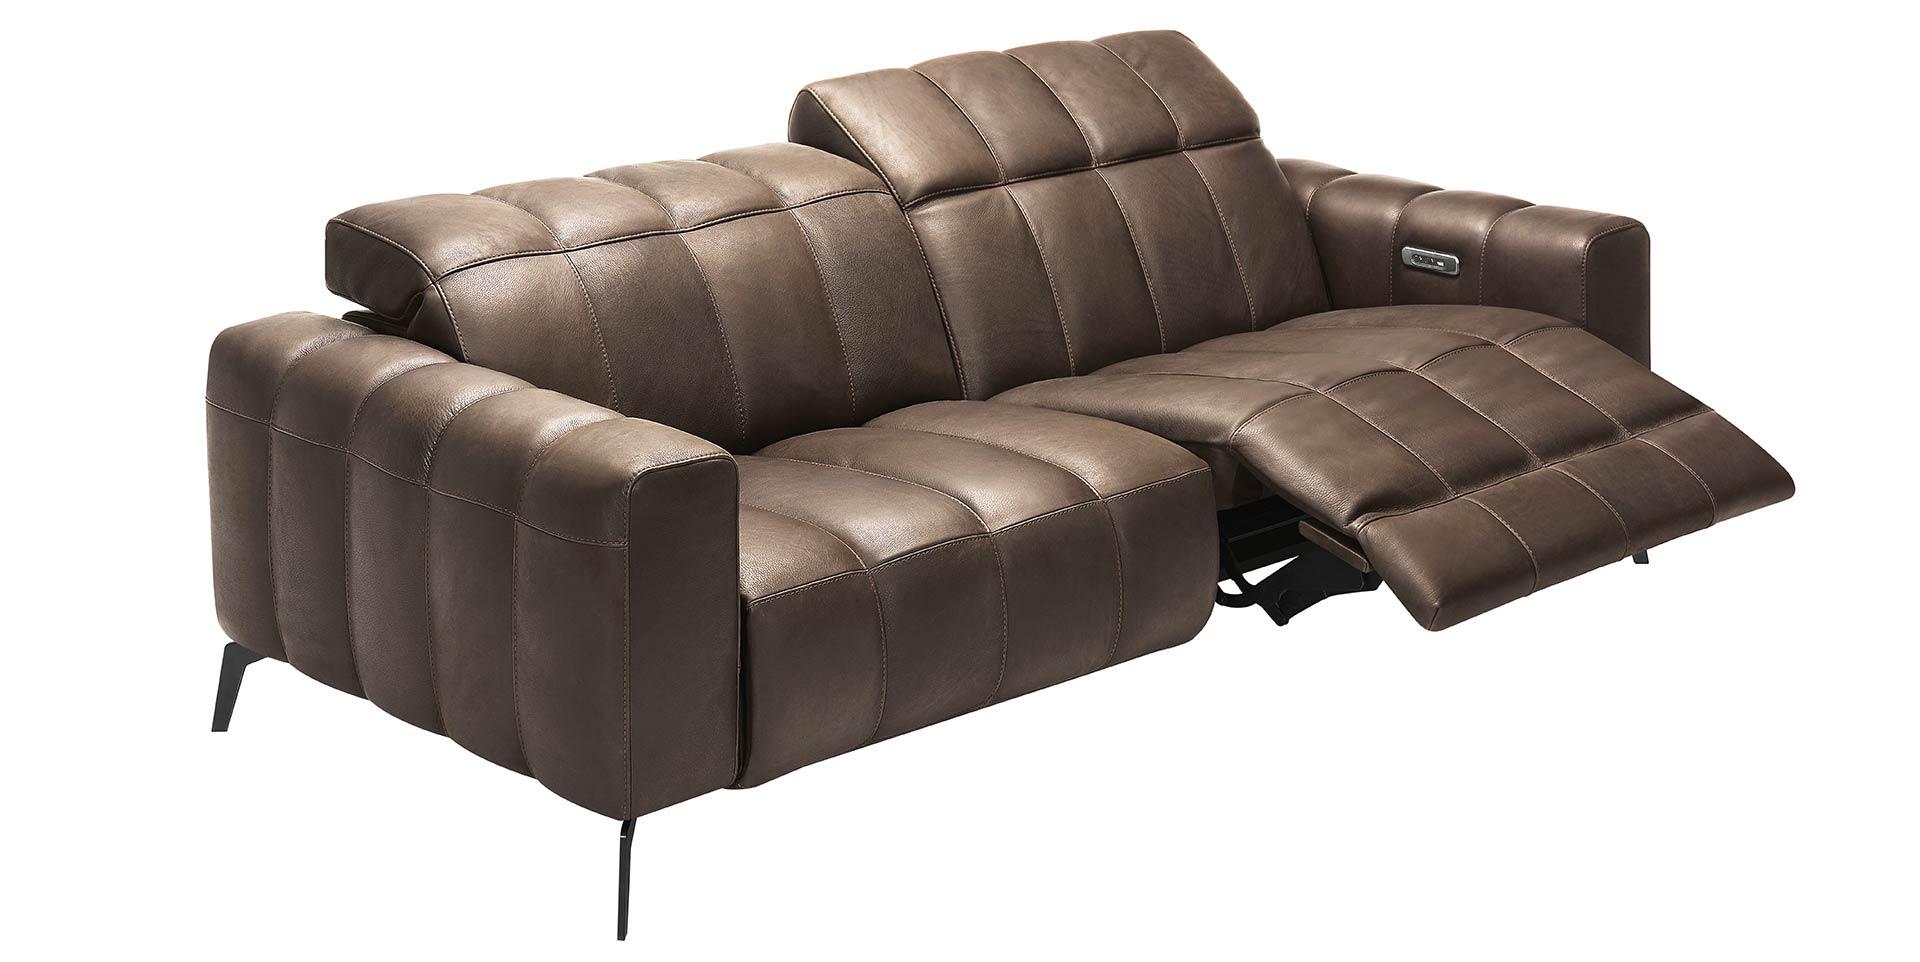 Canapé - Fauteuil inclinable